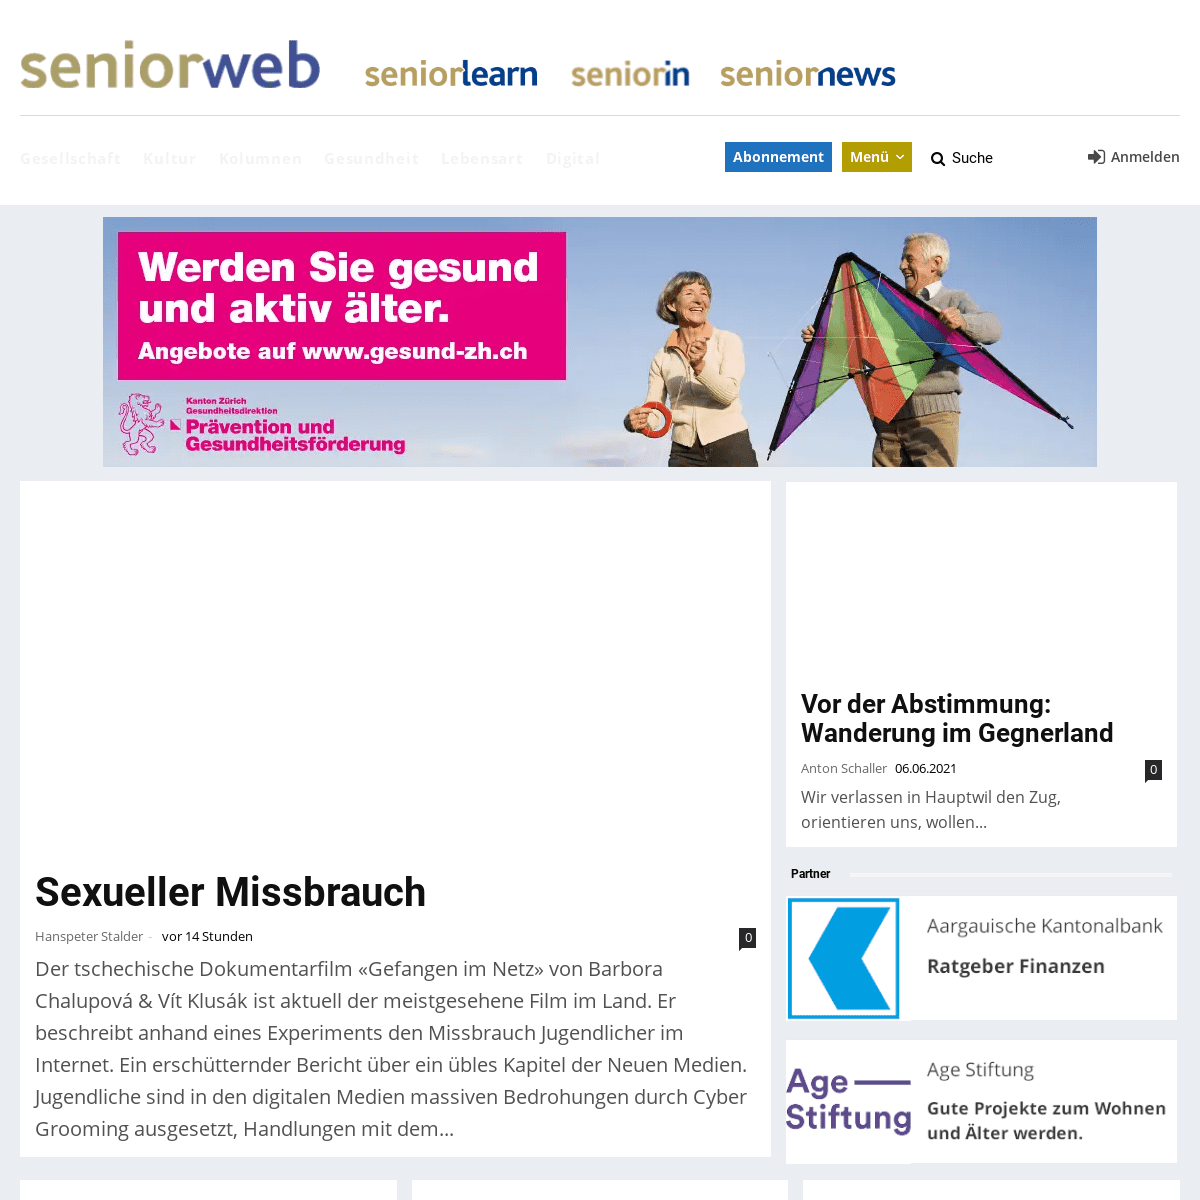 A complete backup of https://seniorweb.ch